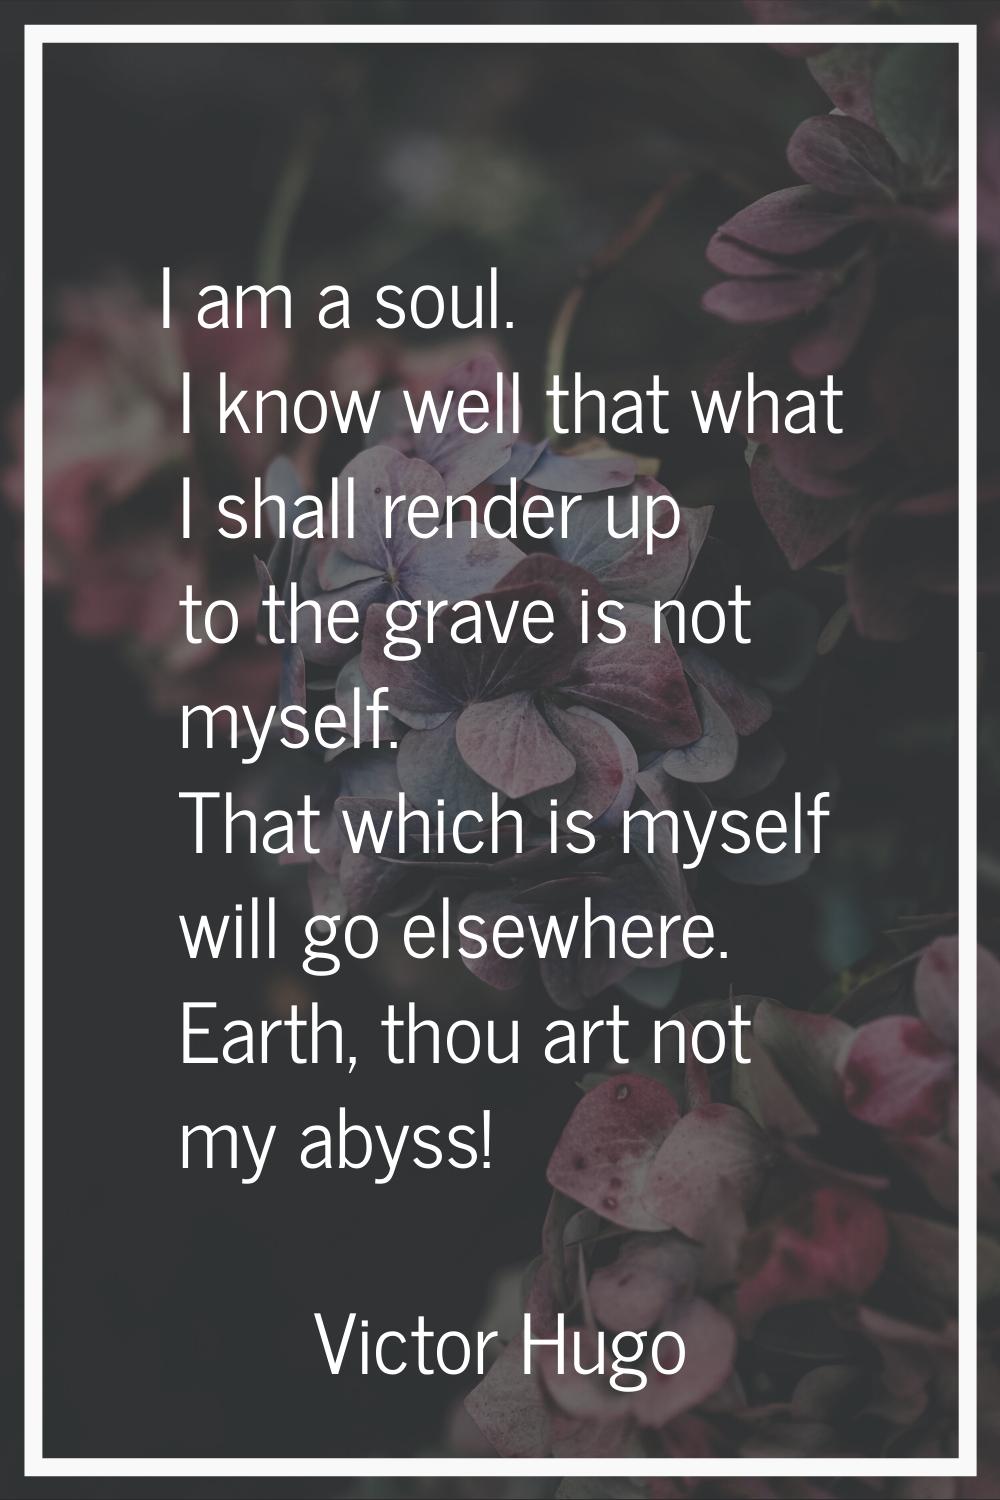 I am a soul. I know well that what I shall render up to the grave is not myself. That which is myse